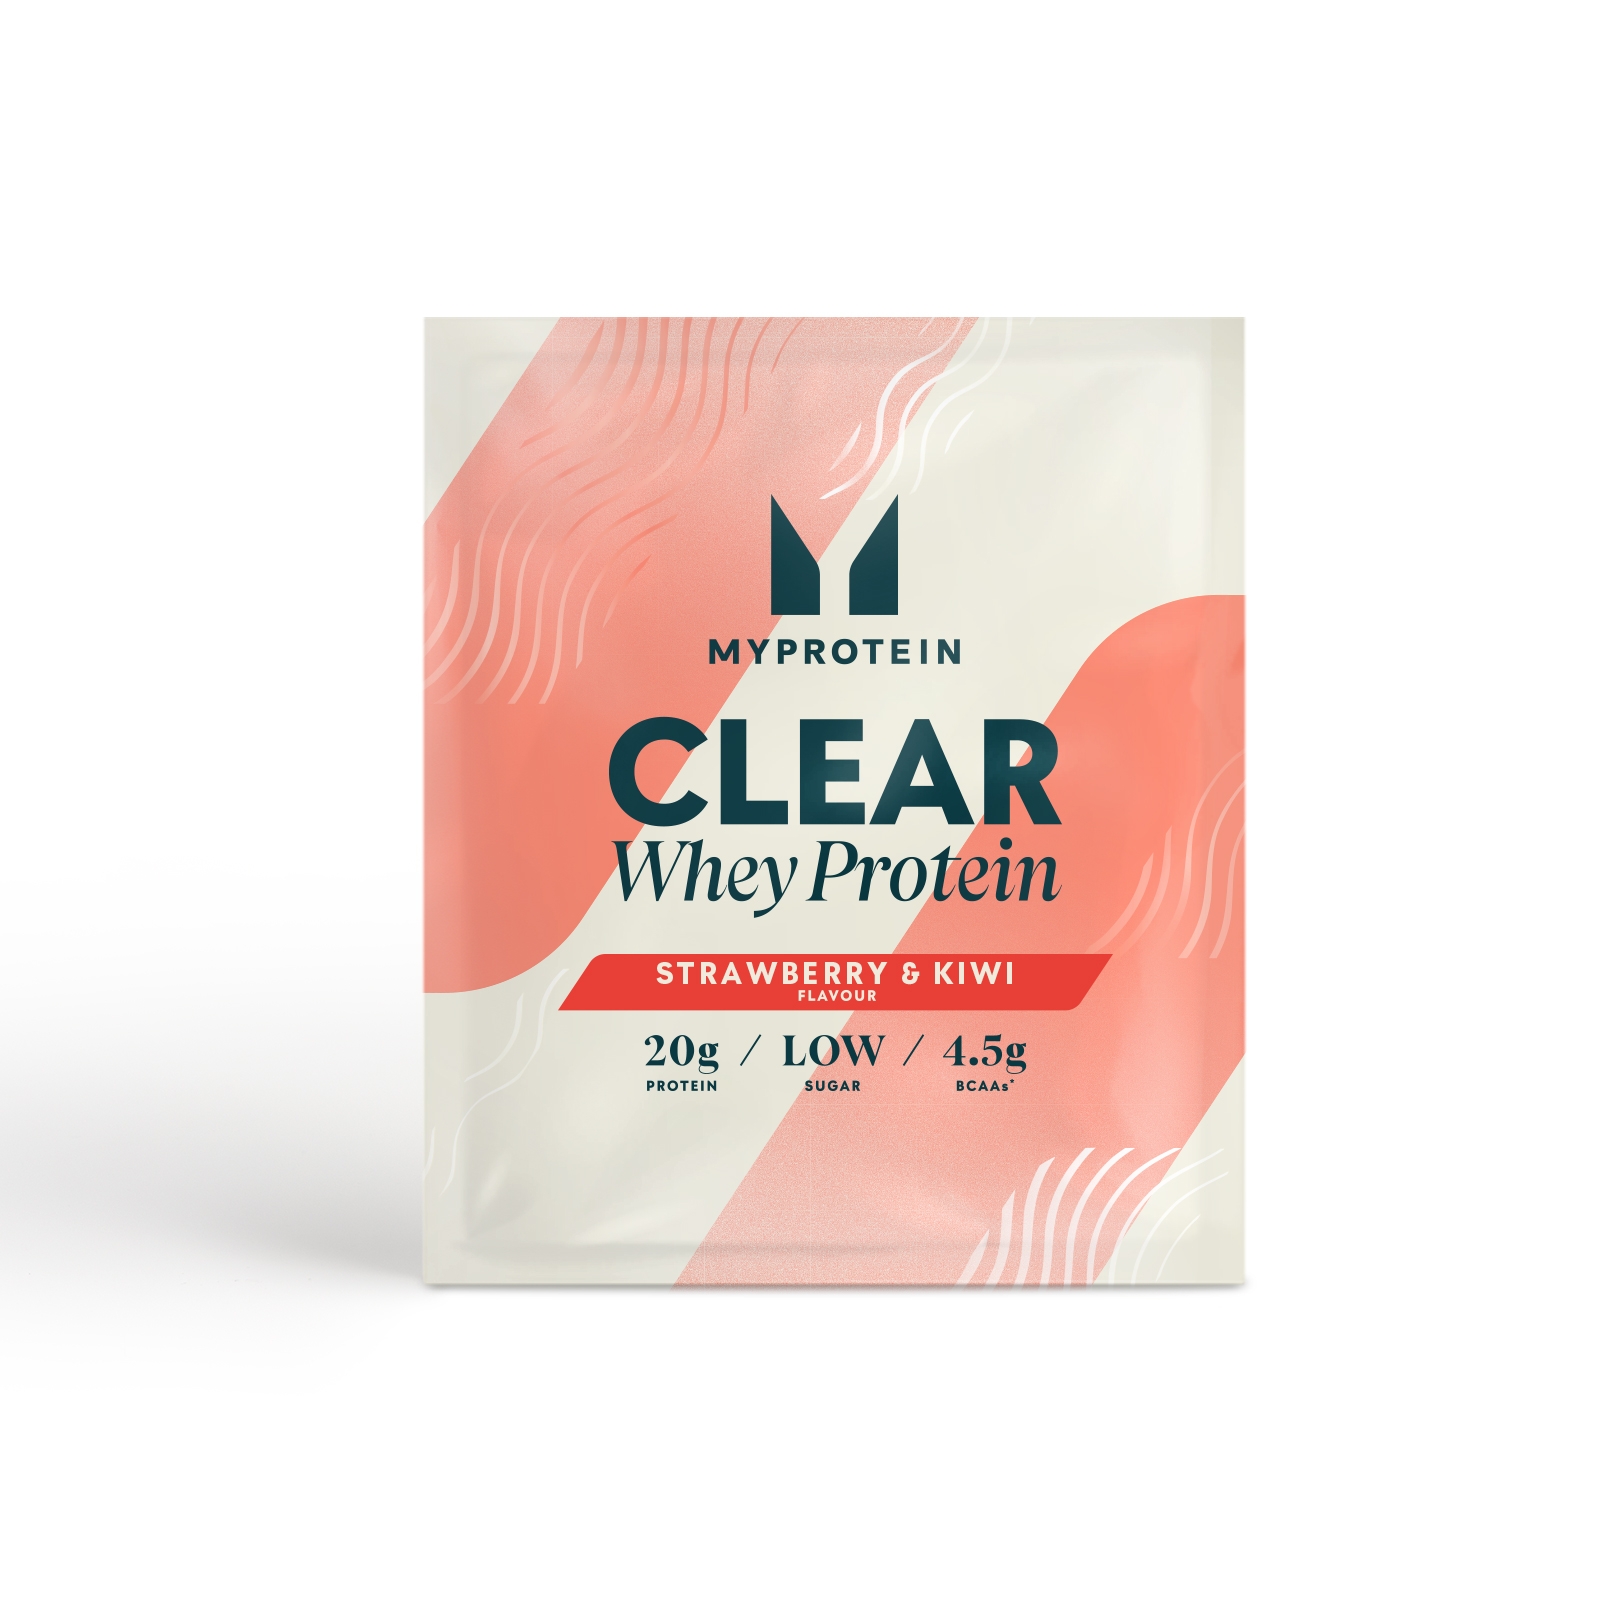 Image of Myprotein Clear Whey Isolate (Sample) - 1servings - Fragola e kiwi